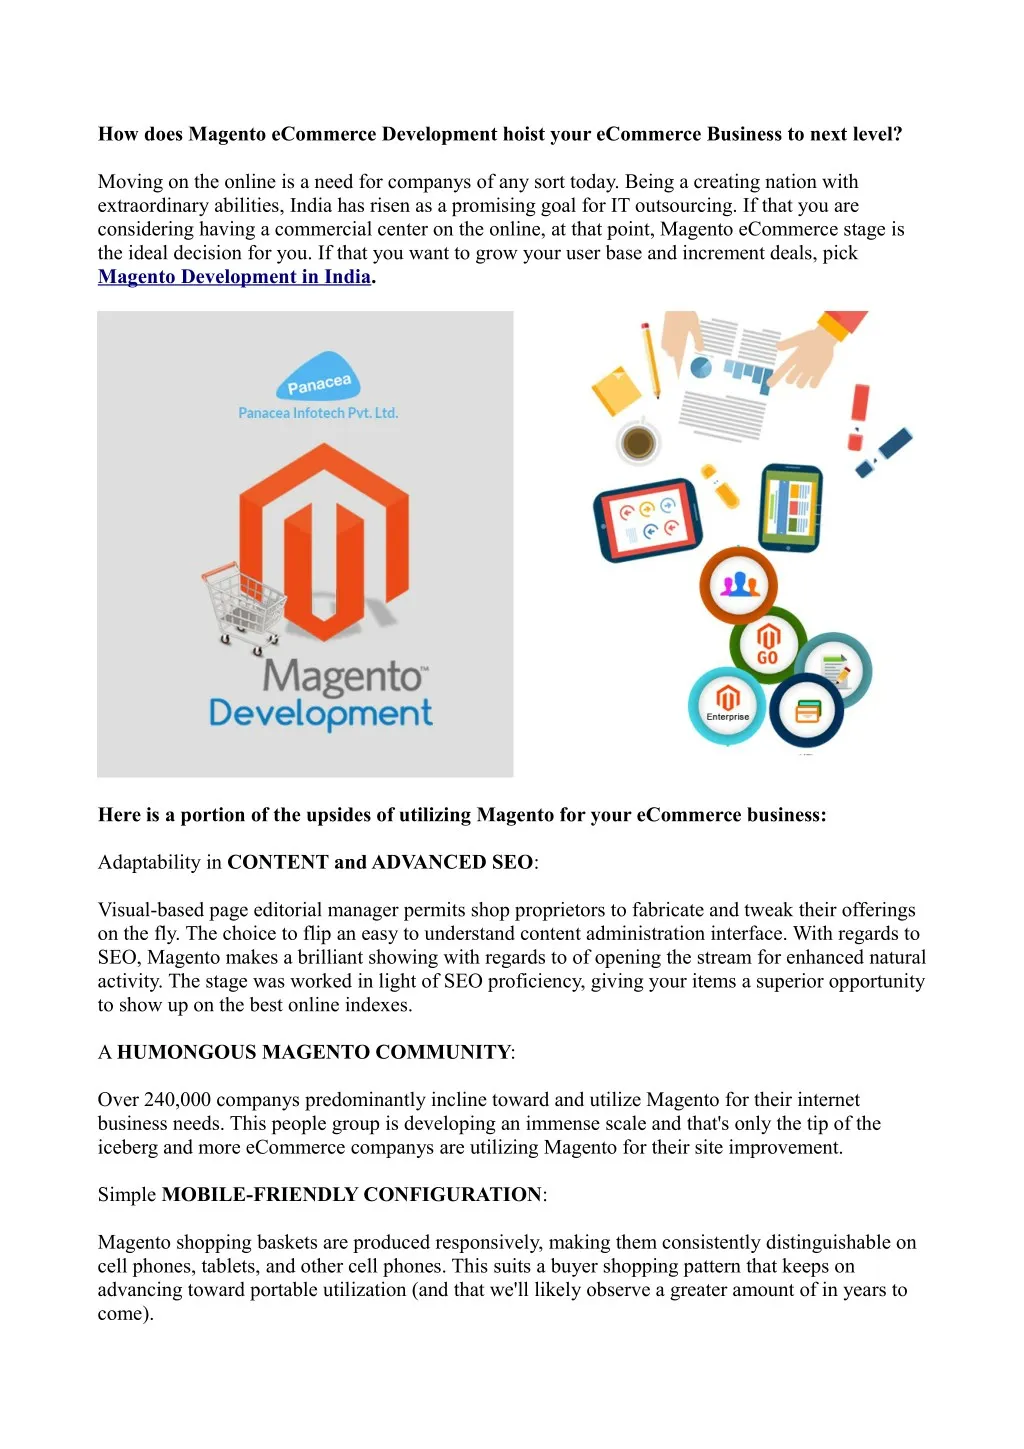 how does magento ecommerce development hoist your n.